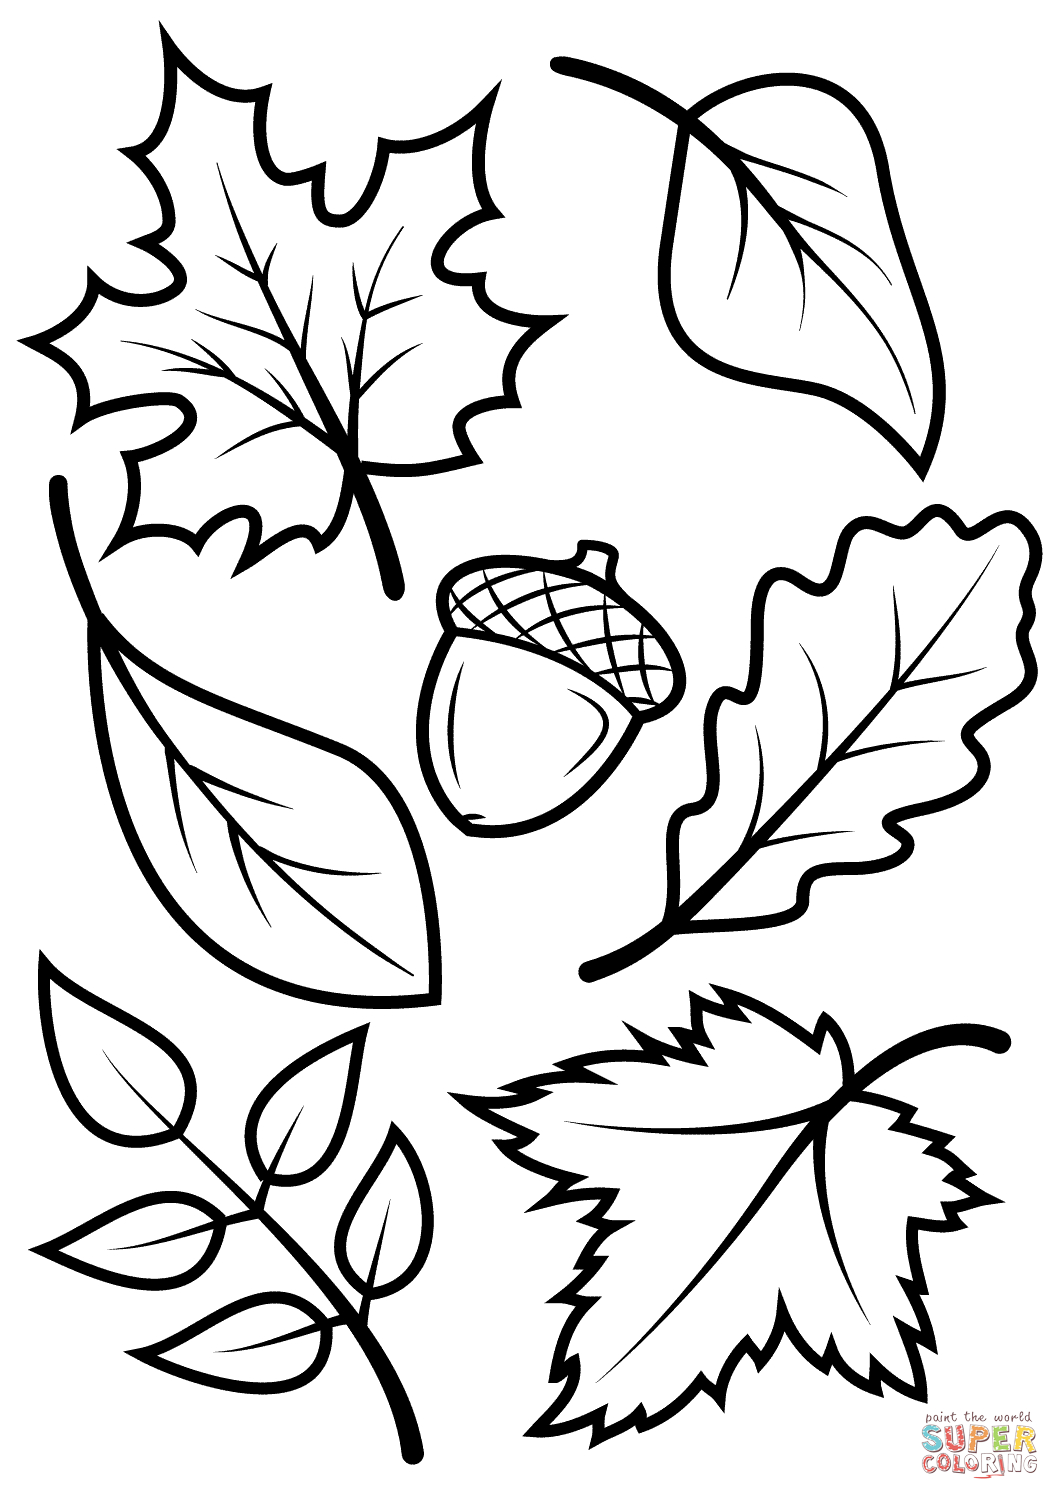 Coloring Pages Autumn Season Fall Leaves And Acorn Coloring Page Free Printable Coloring Pages